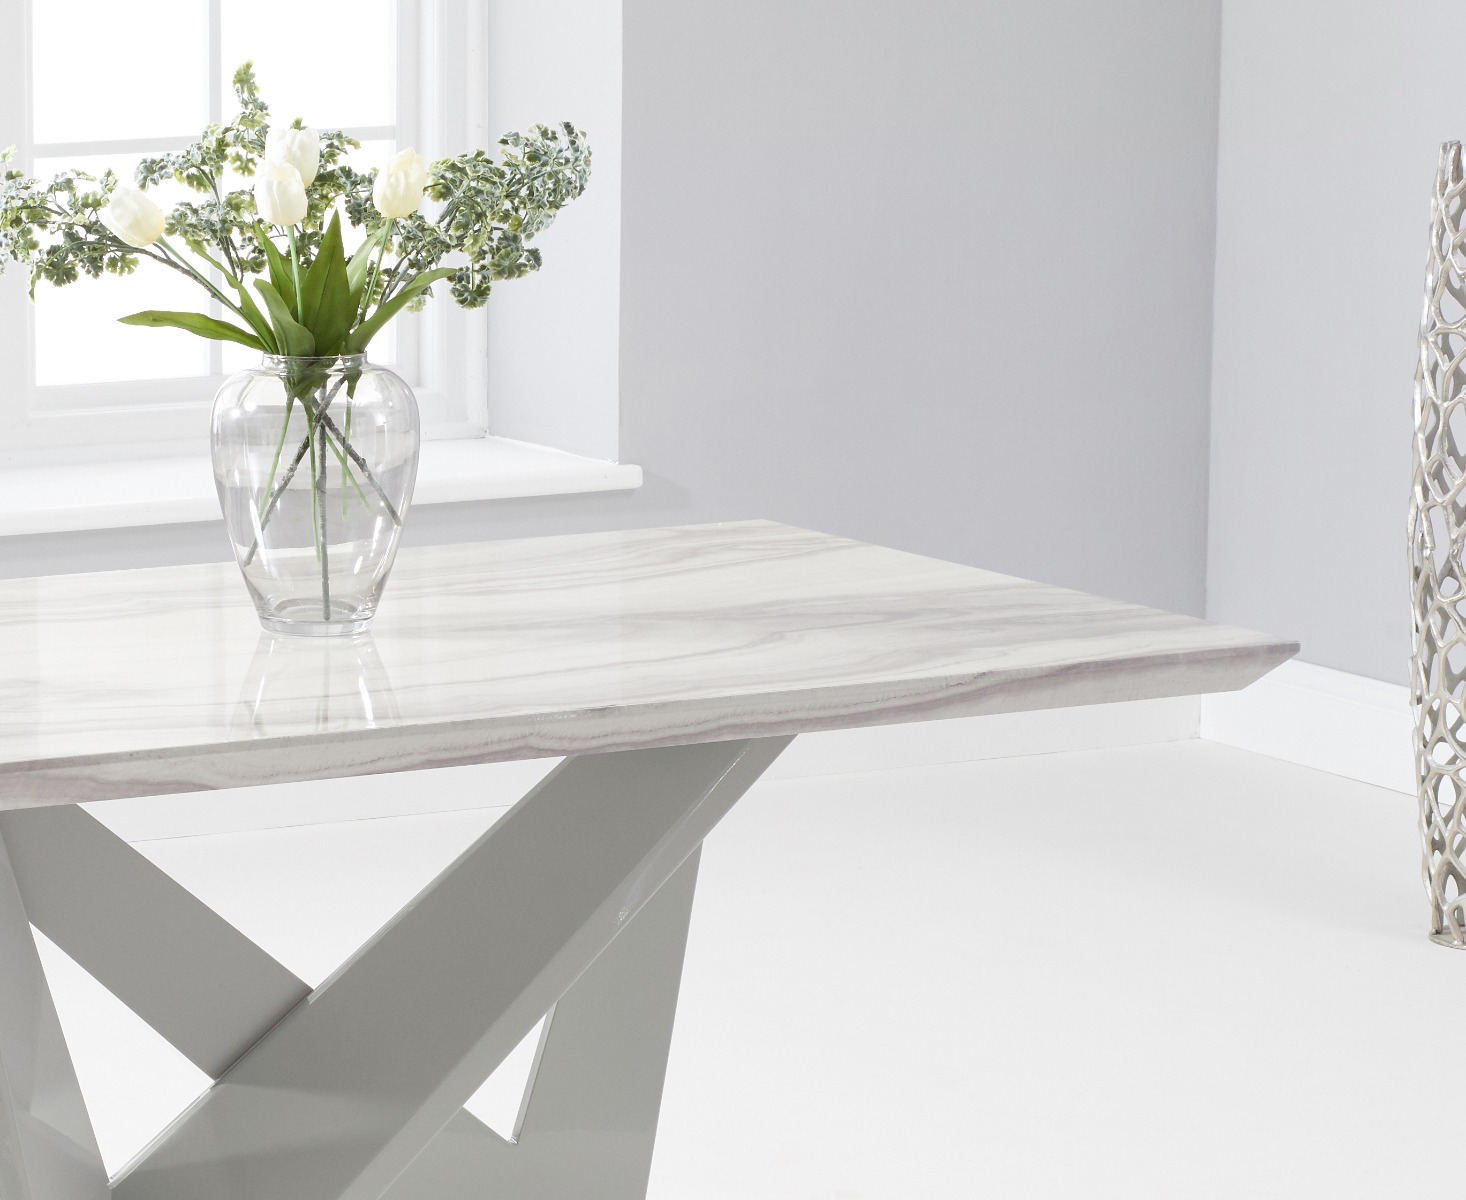 Photo 2 of Reims 150cm marble effect carrera light grey dining table